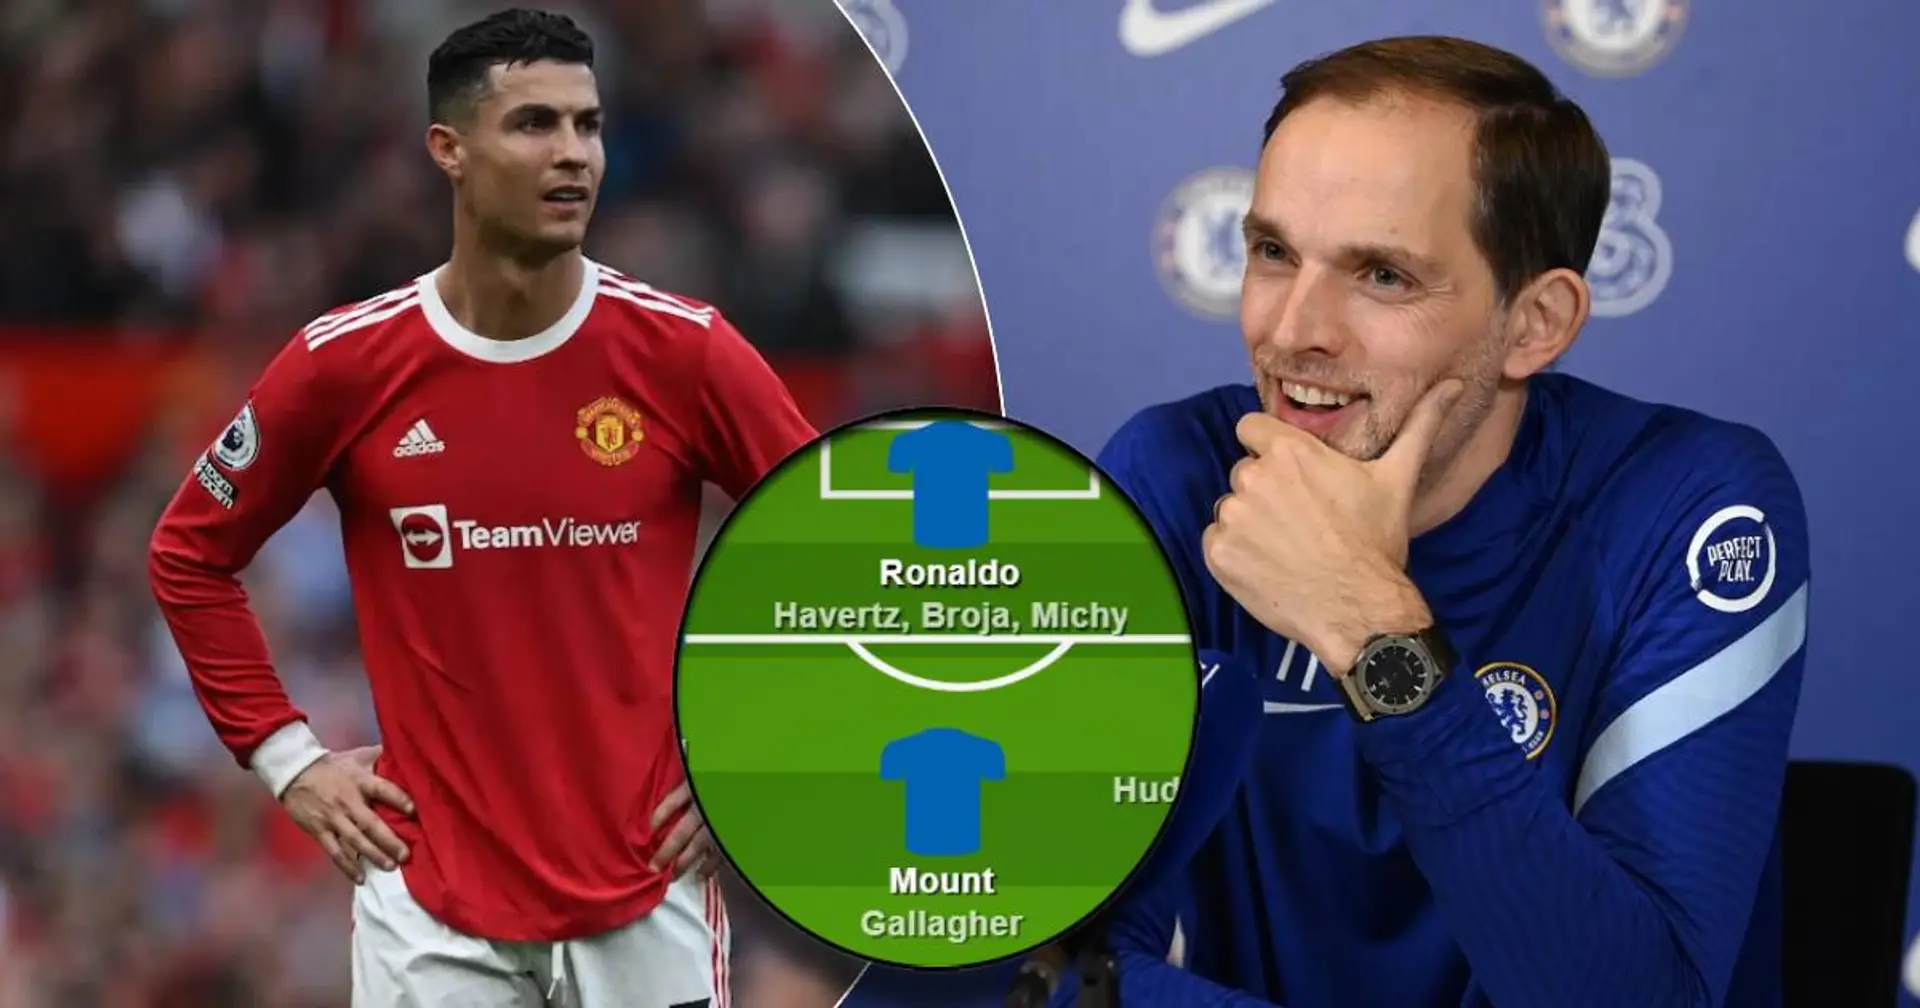 4 spots, 11 players: Chelsea's potential depth up front if Cristiano Ronaldo joins